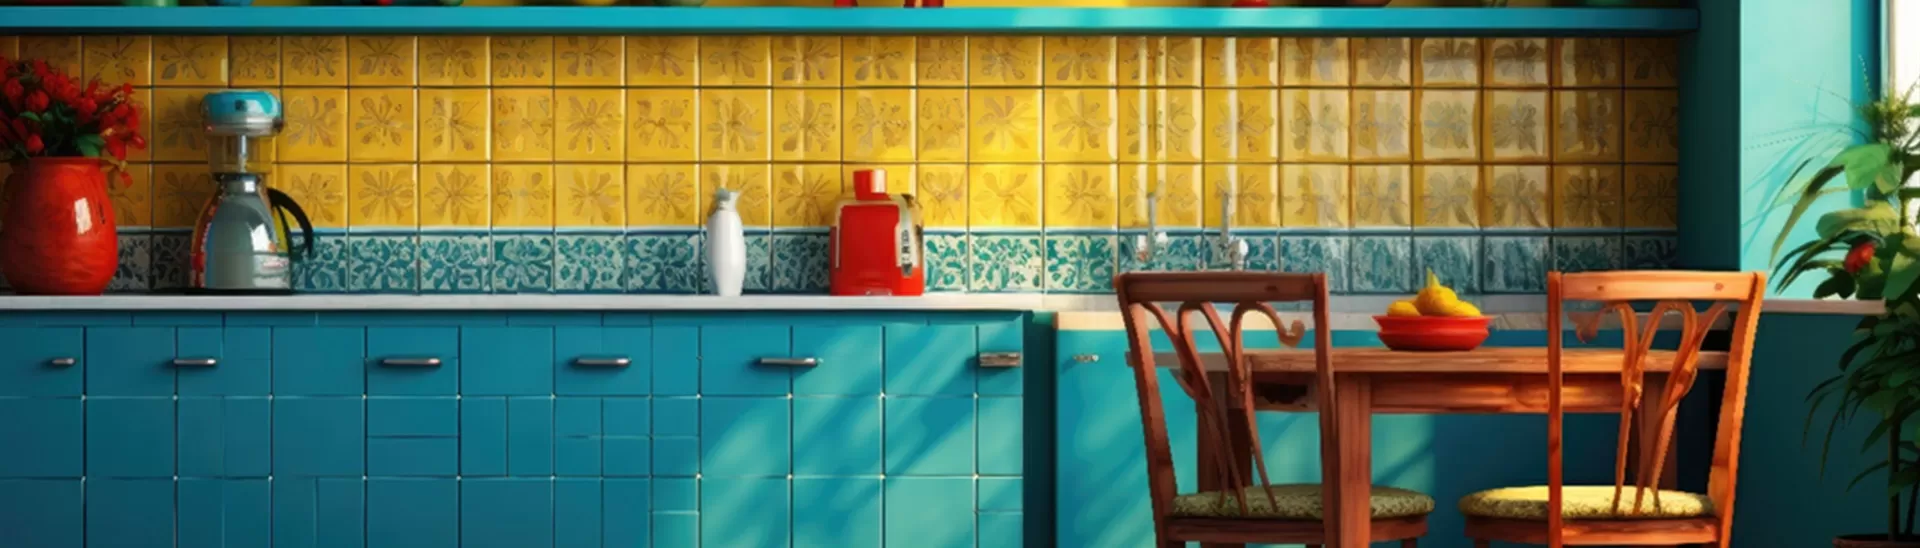 Colourful Kitchens Are Back! A Look at Some Classic Kitchen Design Trends